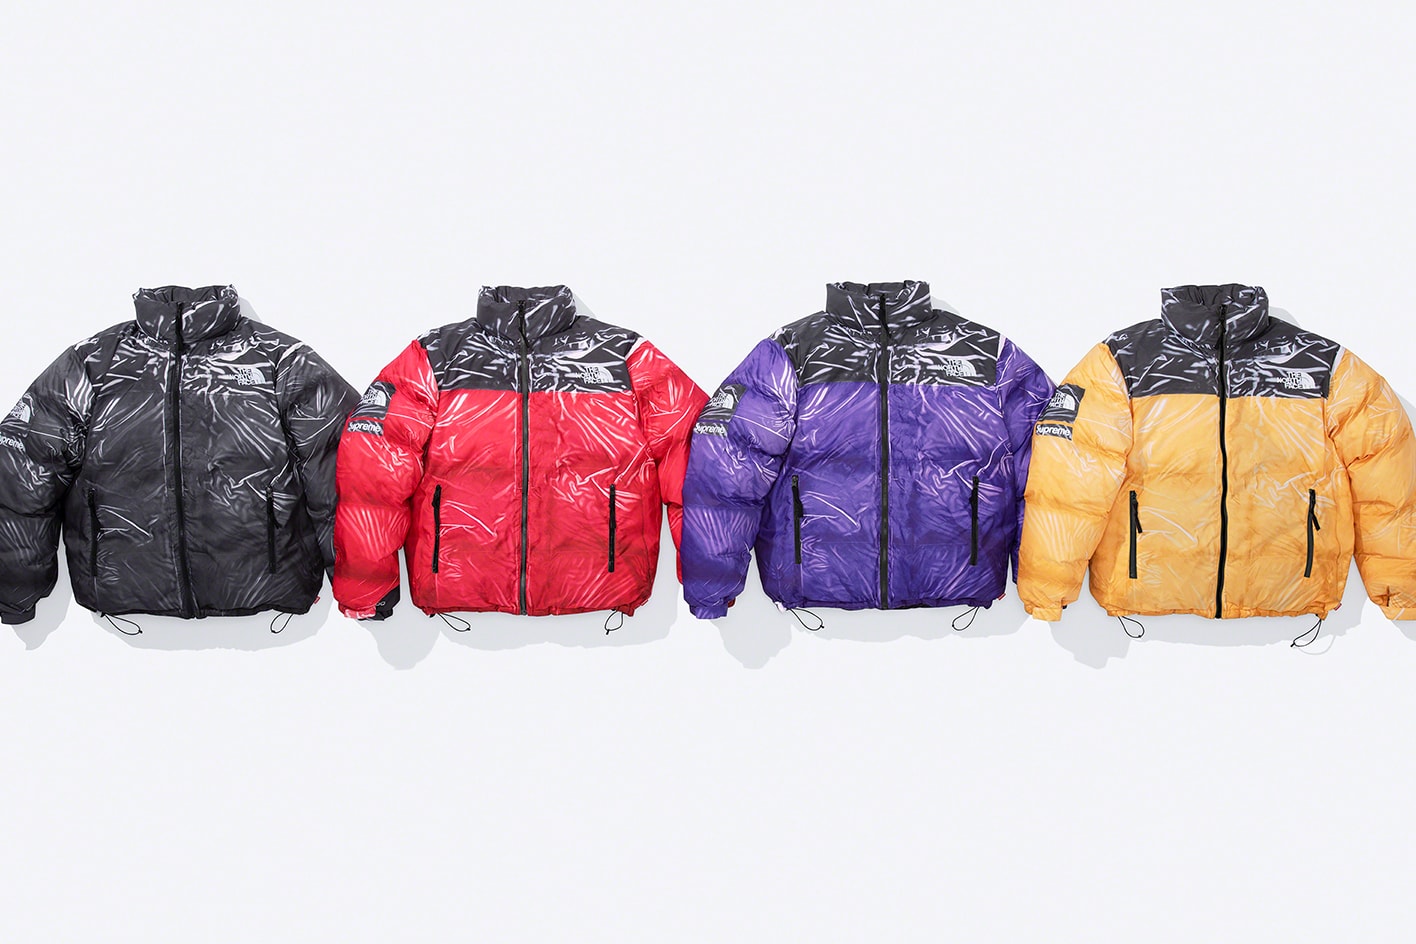 Supreme x The North Face Spring 2022 Collaboration in 2023